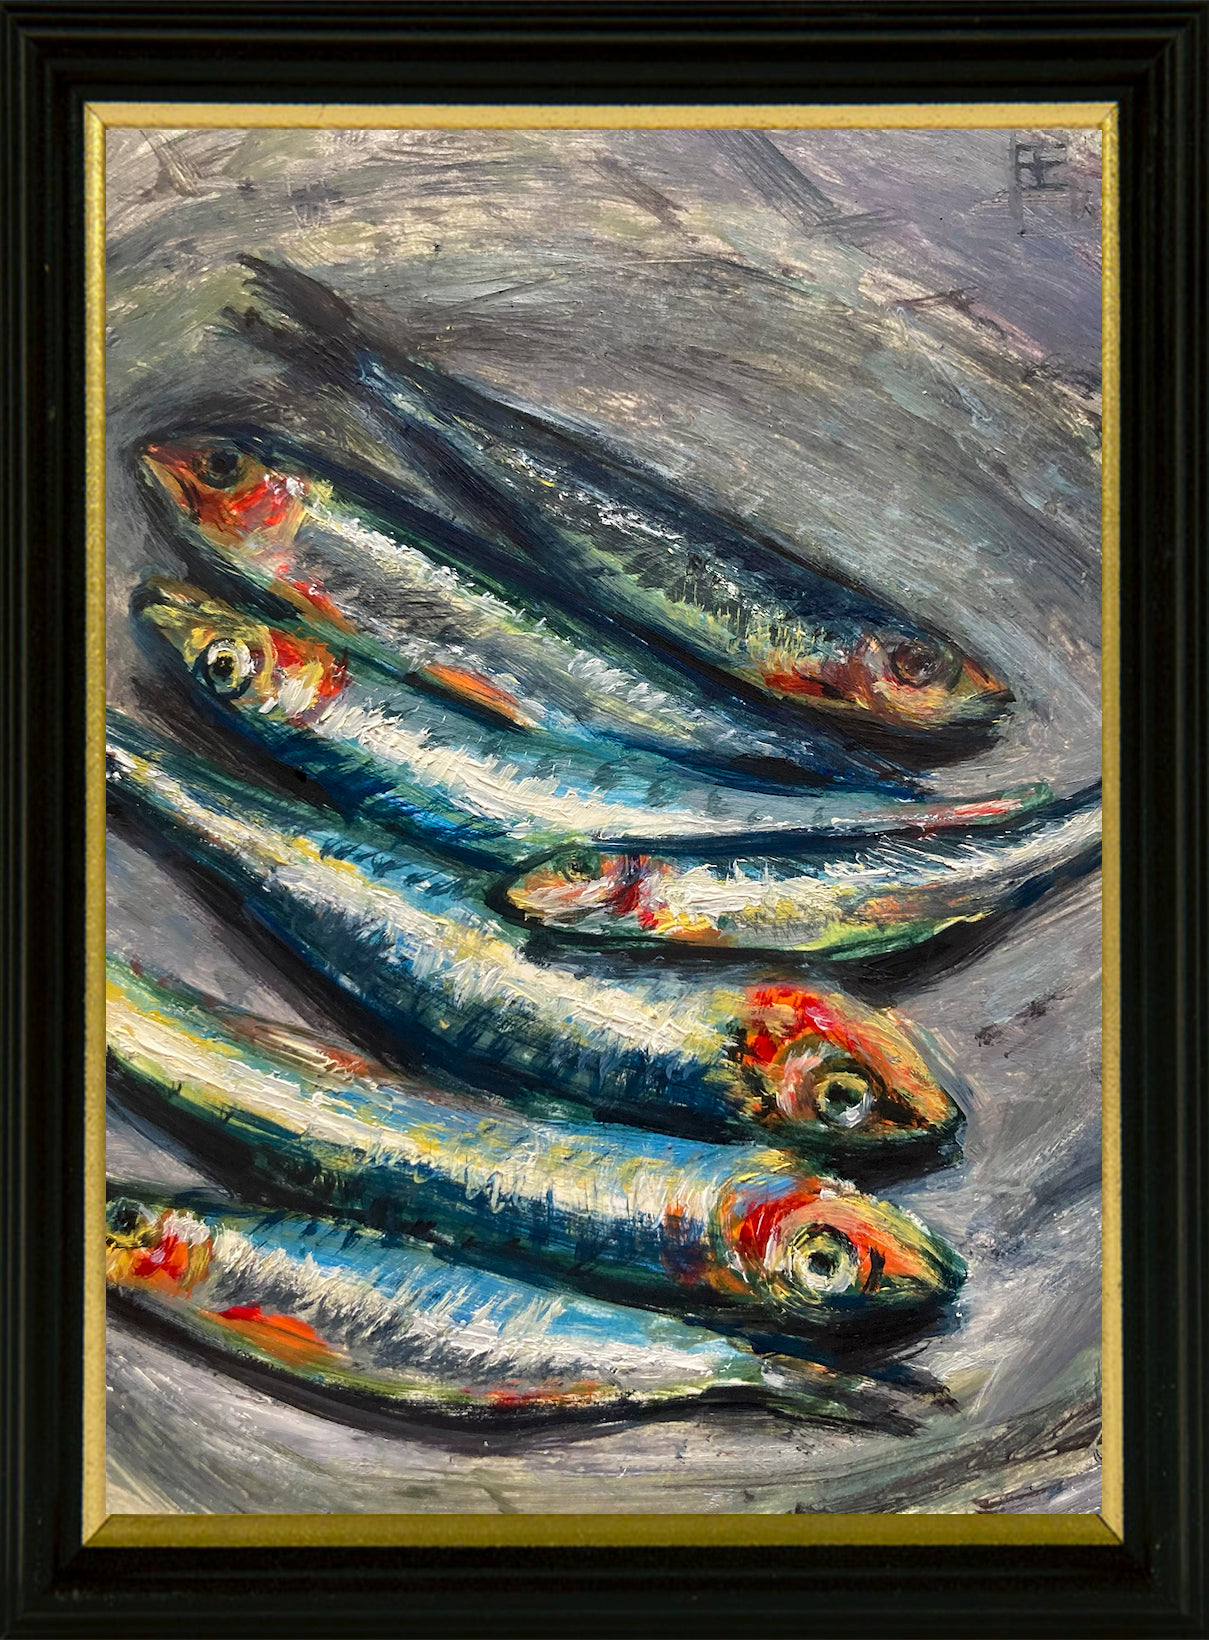 Seven colorful sardines laid out on a silver background; artist E.E. Jacks; 7"Wx9"H framed